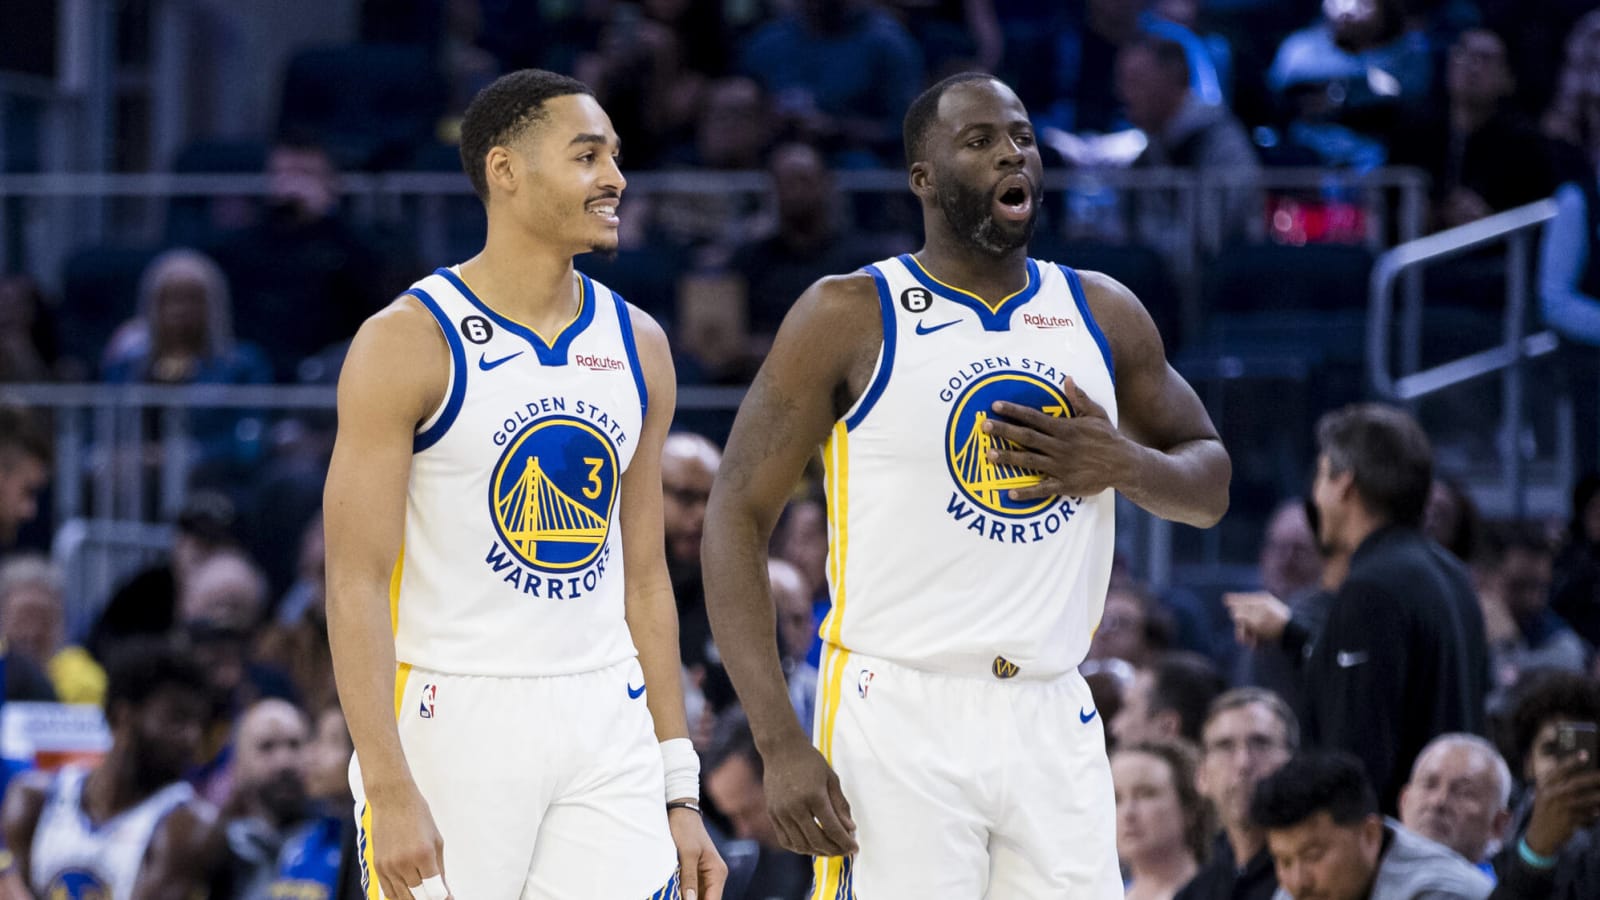 What Jordan Poole allegedly said to Draymond Green before punch